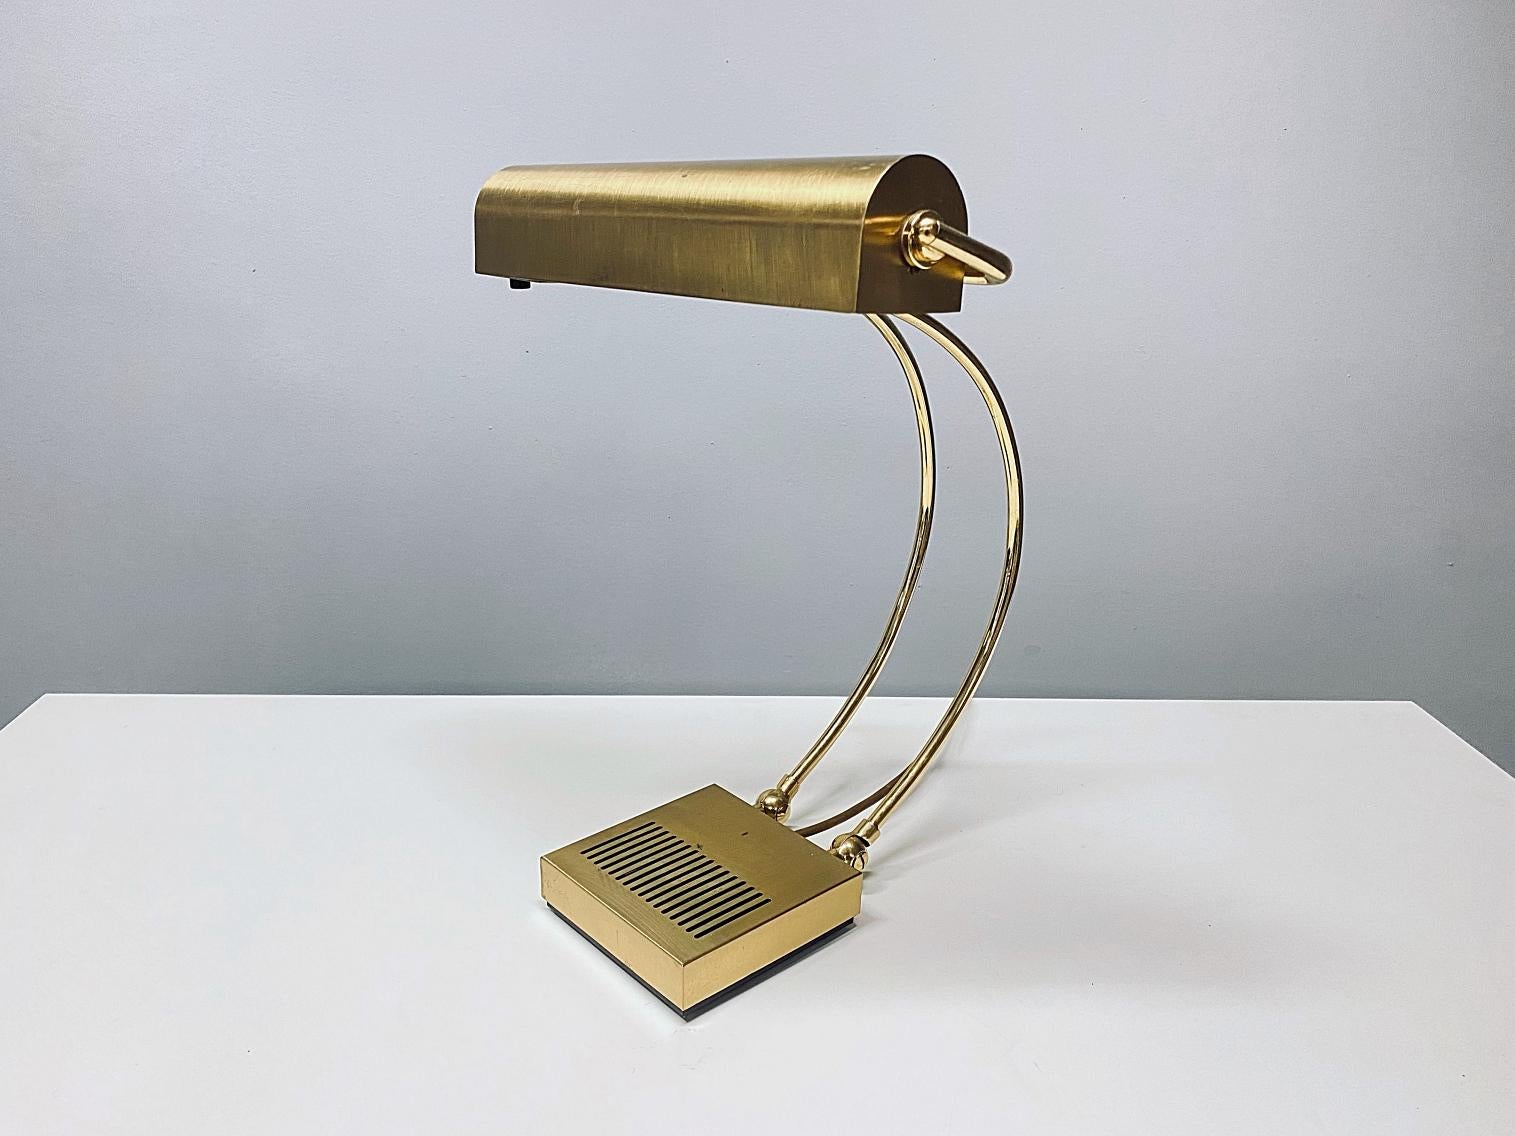 Beautiful adjustable table lamp in style of Eileen Gray manufactured in 1970s, Germany. The lamp is made of polished brass. The lamp provides a smooth and wonderful light. The lamp is in a very good original condition, fully working and tested. One